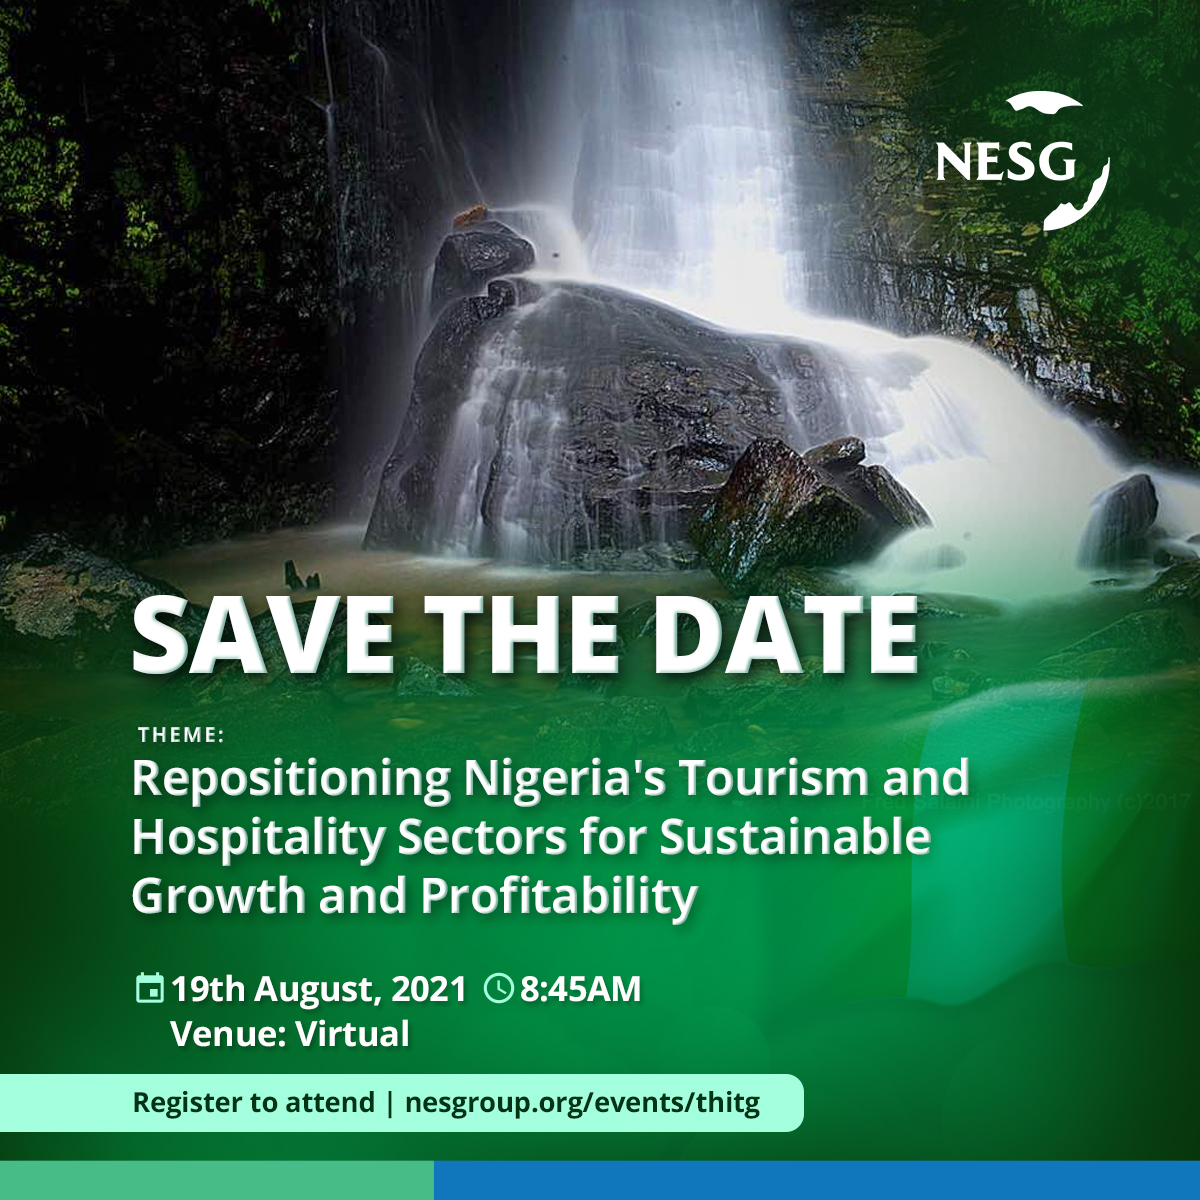 Repositioning Nigeria's Tourism and Hospitality Sectors for Sustainable Growth and Profitability, The Nigerian Economic Summit Group, The NESG, think-tank, think, tank, nigeria, policy, nesg, africa, number one think in africa, best think in nigeria, the best think tank in africa, top 10 think tanks in nigeria, think tank nigeria, economy, business, PPD, public, private, dialogue, Nigeria, Nigeria PPD, NIGERIA, PPD